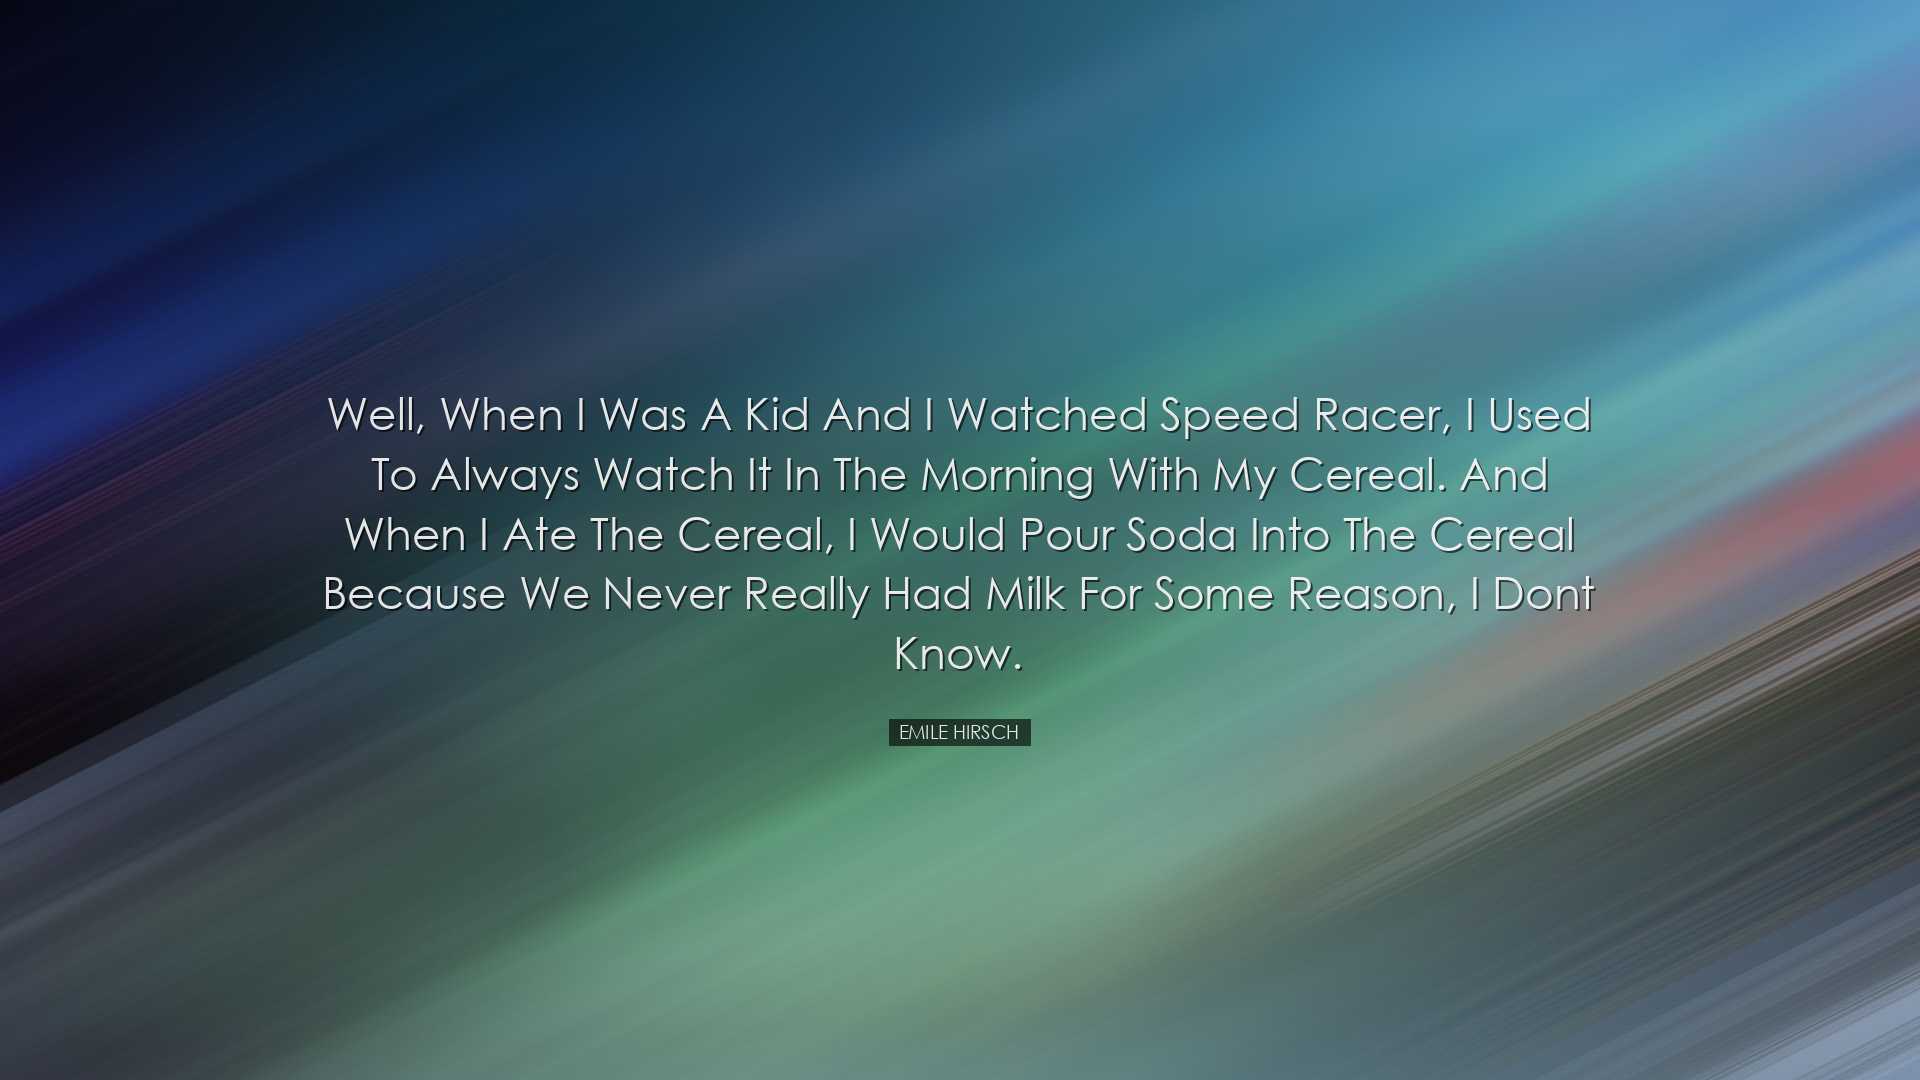 Well, when I was a kid and I watched Speed Racer, I used to always